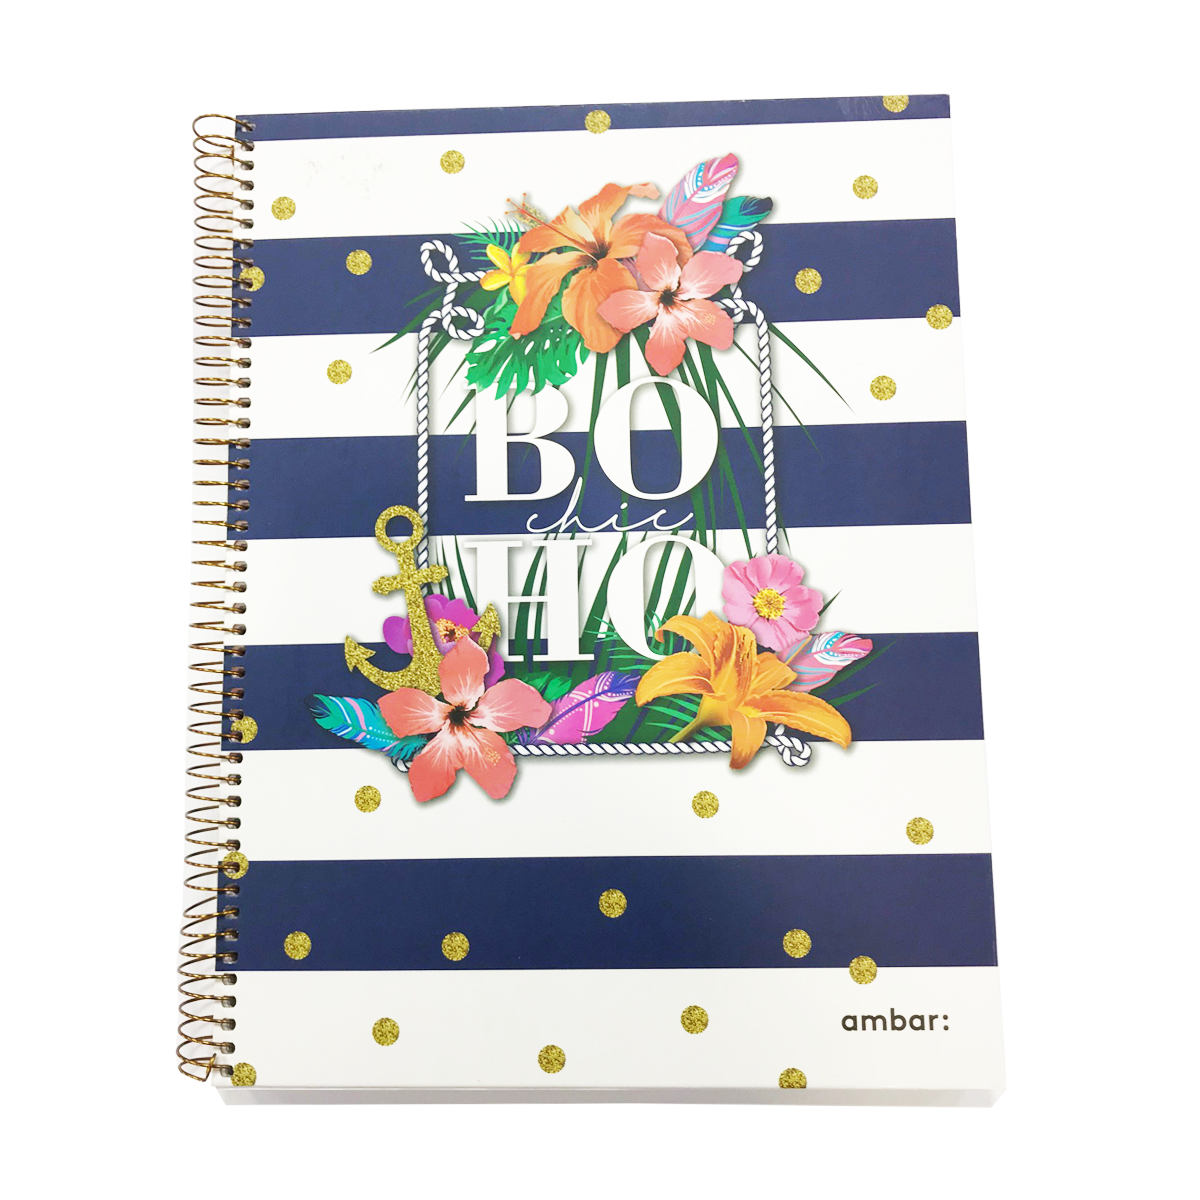 Ambar A4 NoteBook 120 Pages Hd Cover Spiral Bind